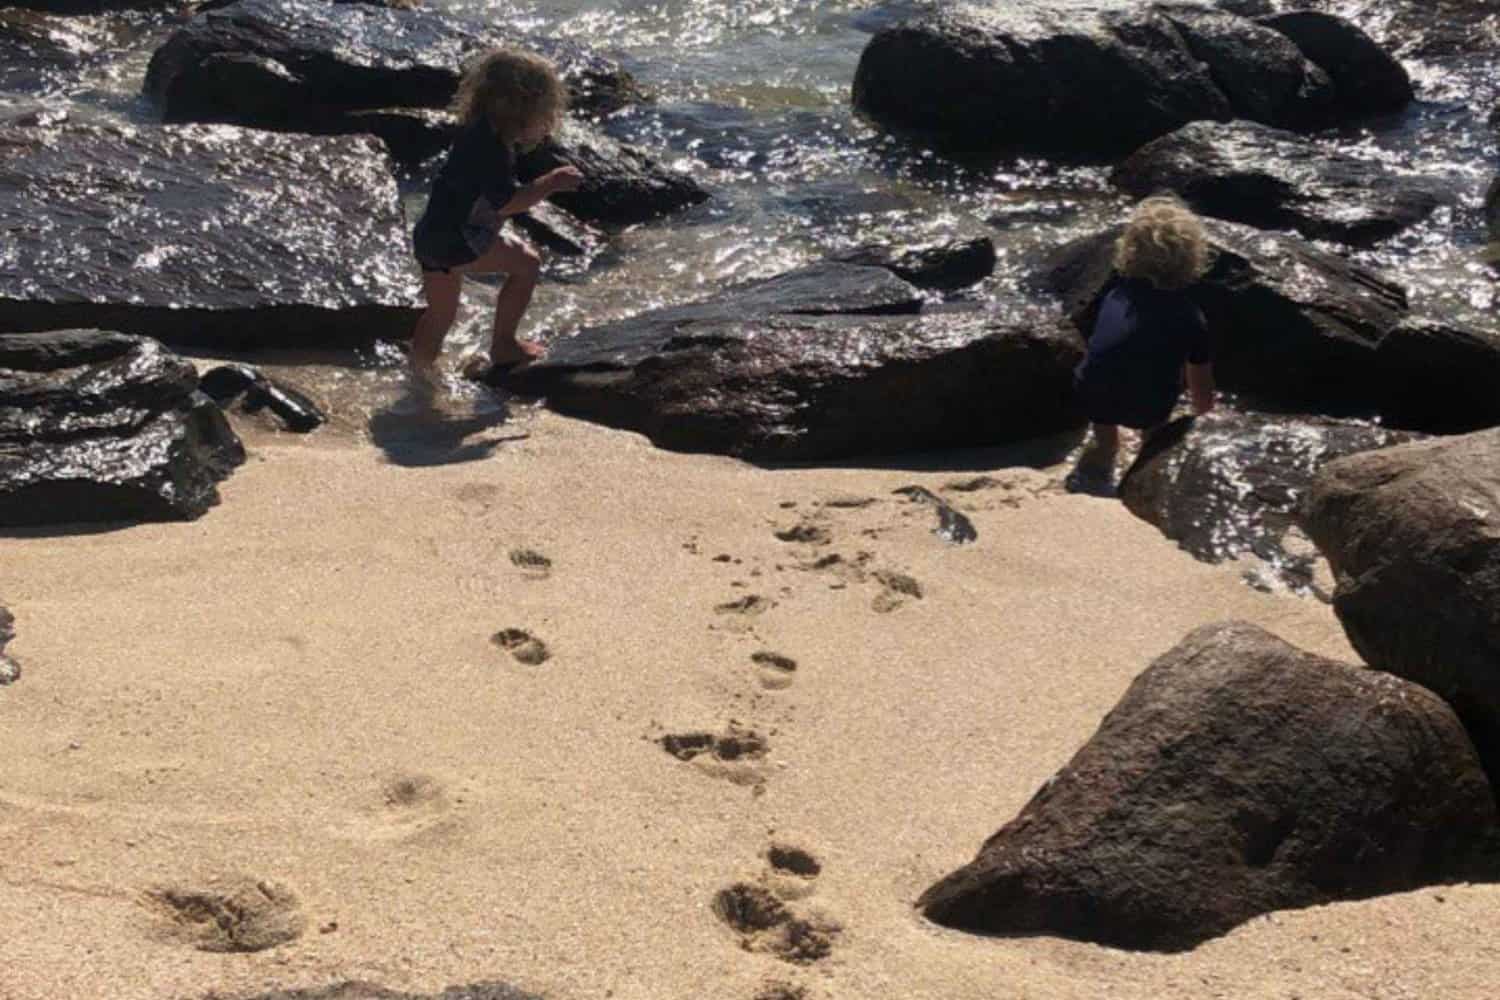 Children explore the natural rock pools on a sunlit Margaret River beach, leaving a trail of footprints in the sand, capturing a moment of discovery and play on the rugged coastline.